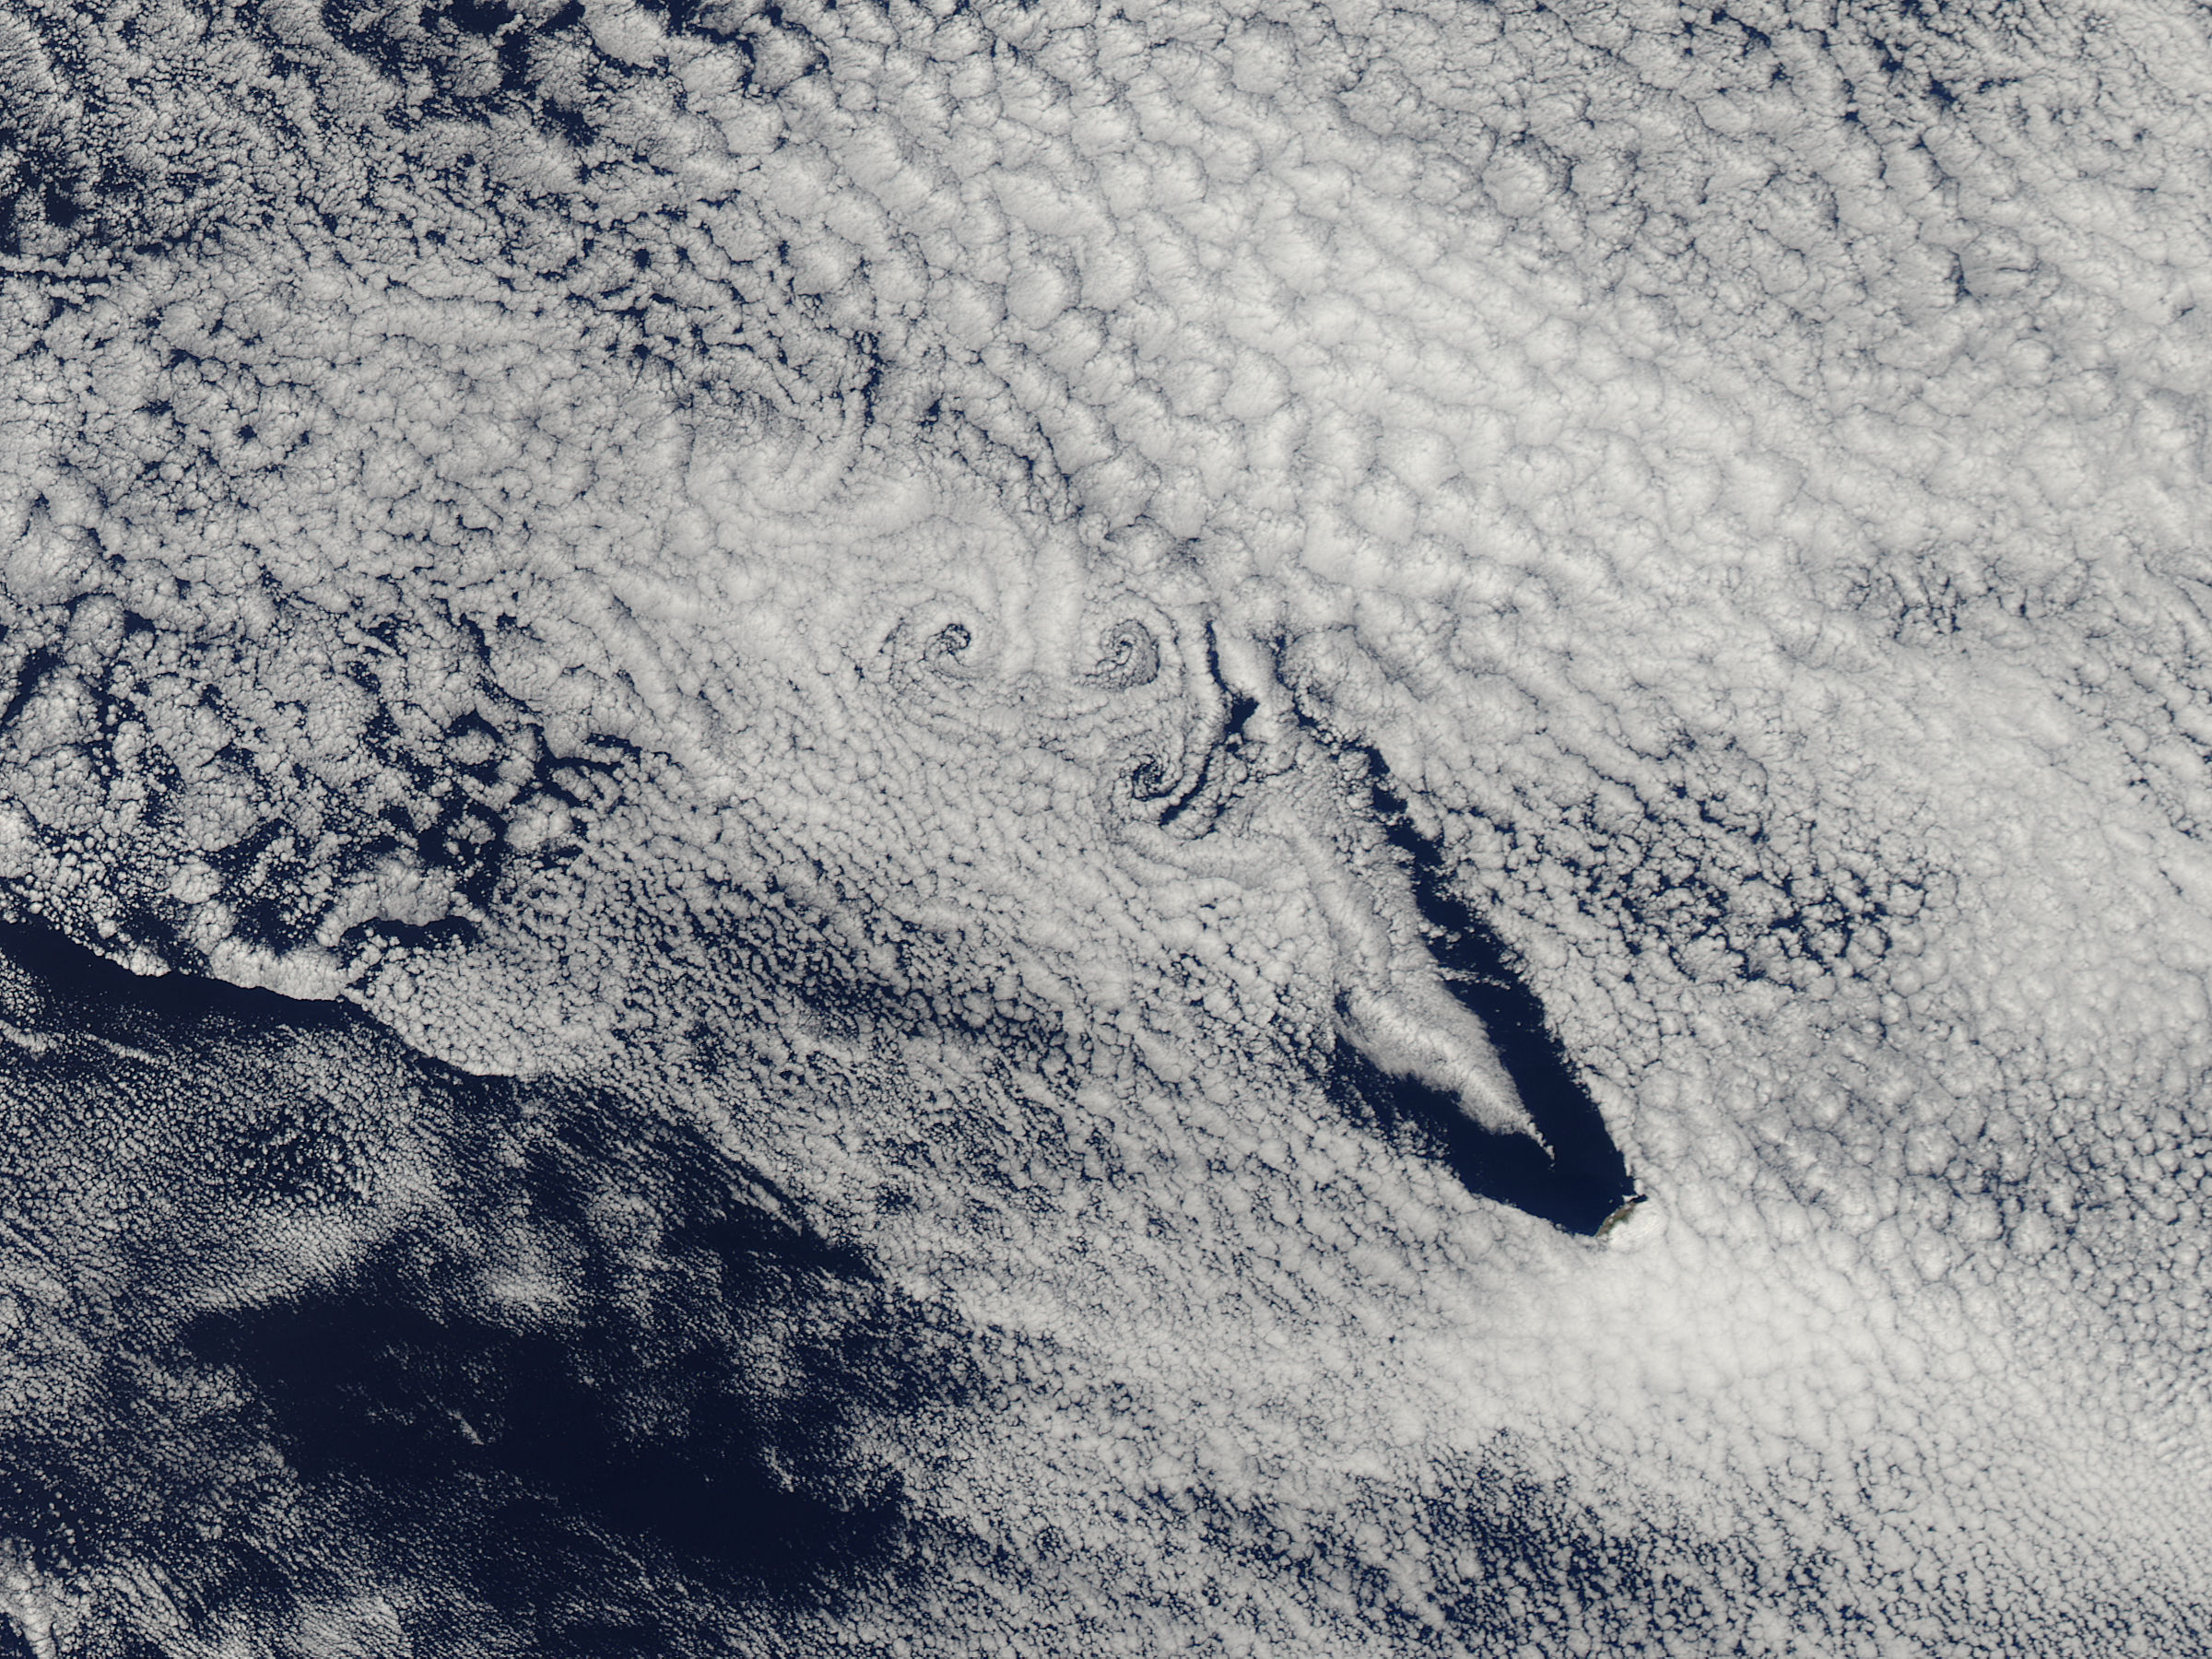 Cloud vortices off Saint Helena Island, south Atlantic Ocean - related image preview